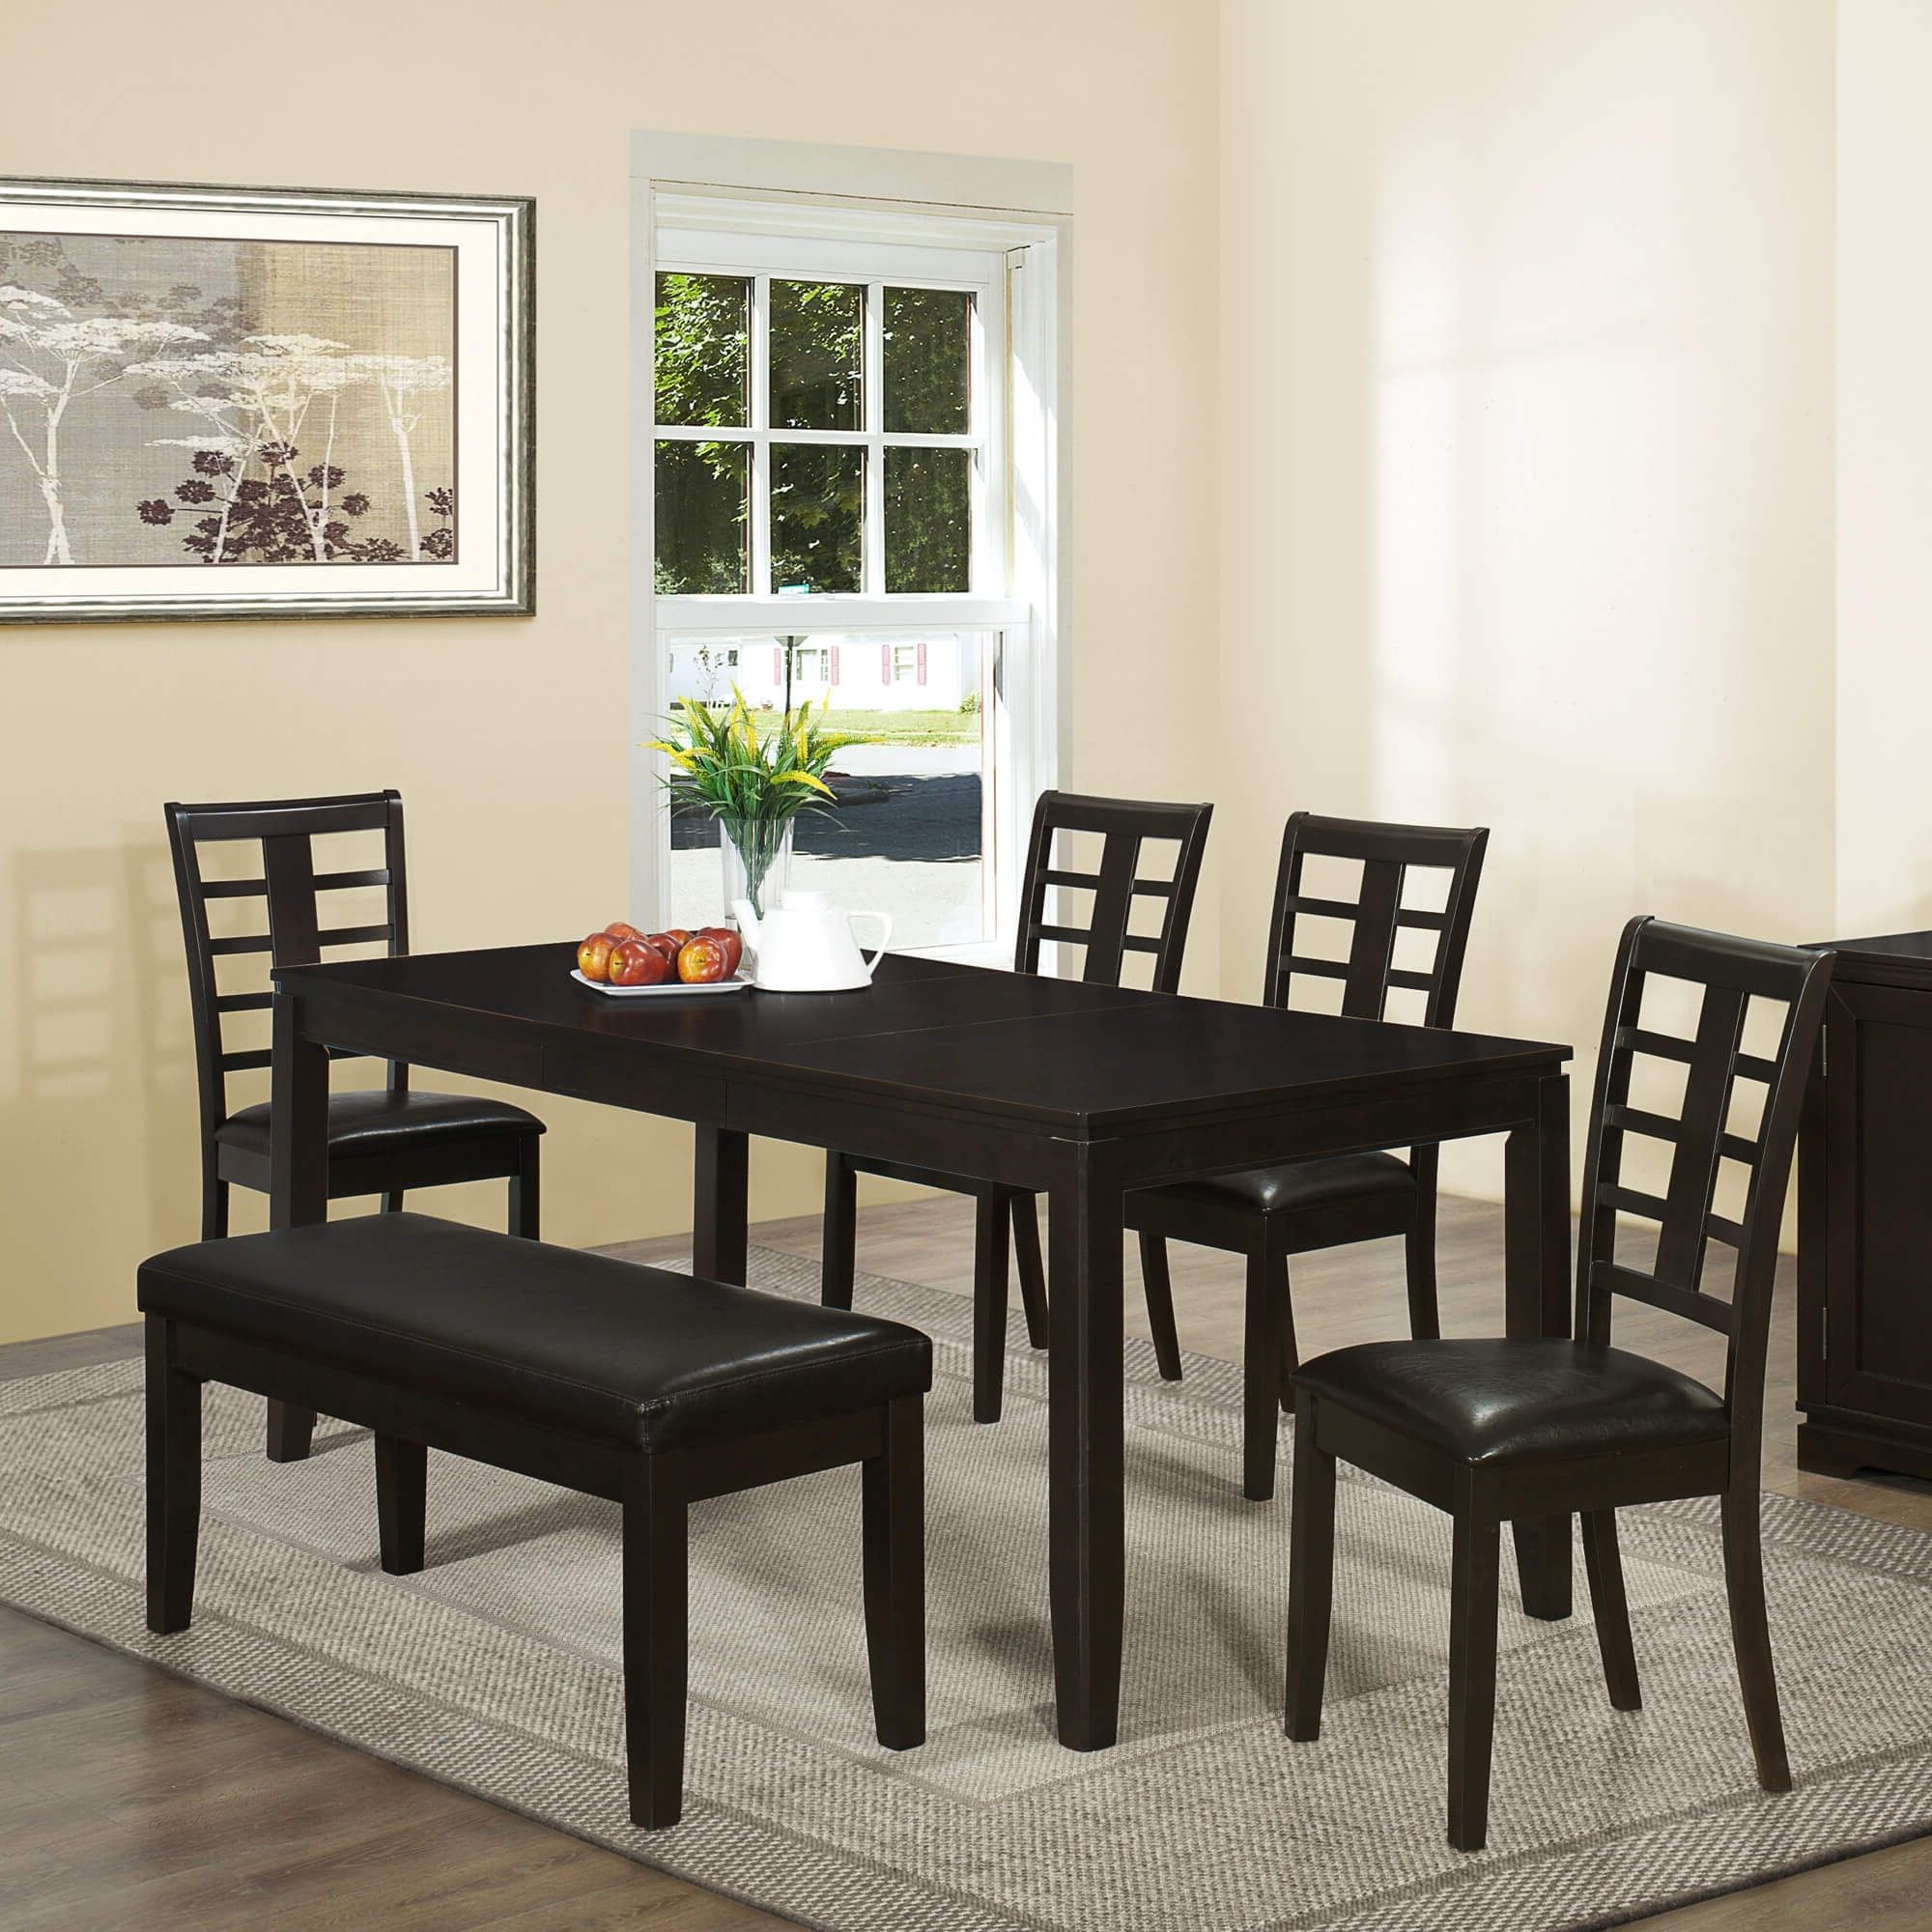 Two Person Dining Table Sets Within Latest 26 Dining Room Sets (big And Small) With Bench Seating (2018) (View 10 of 25)